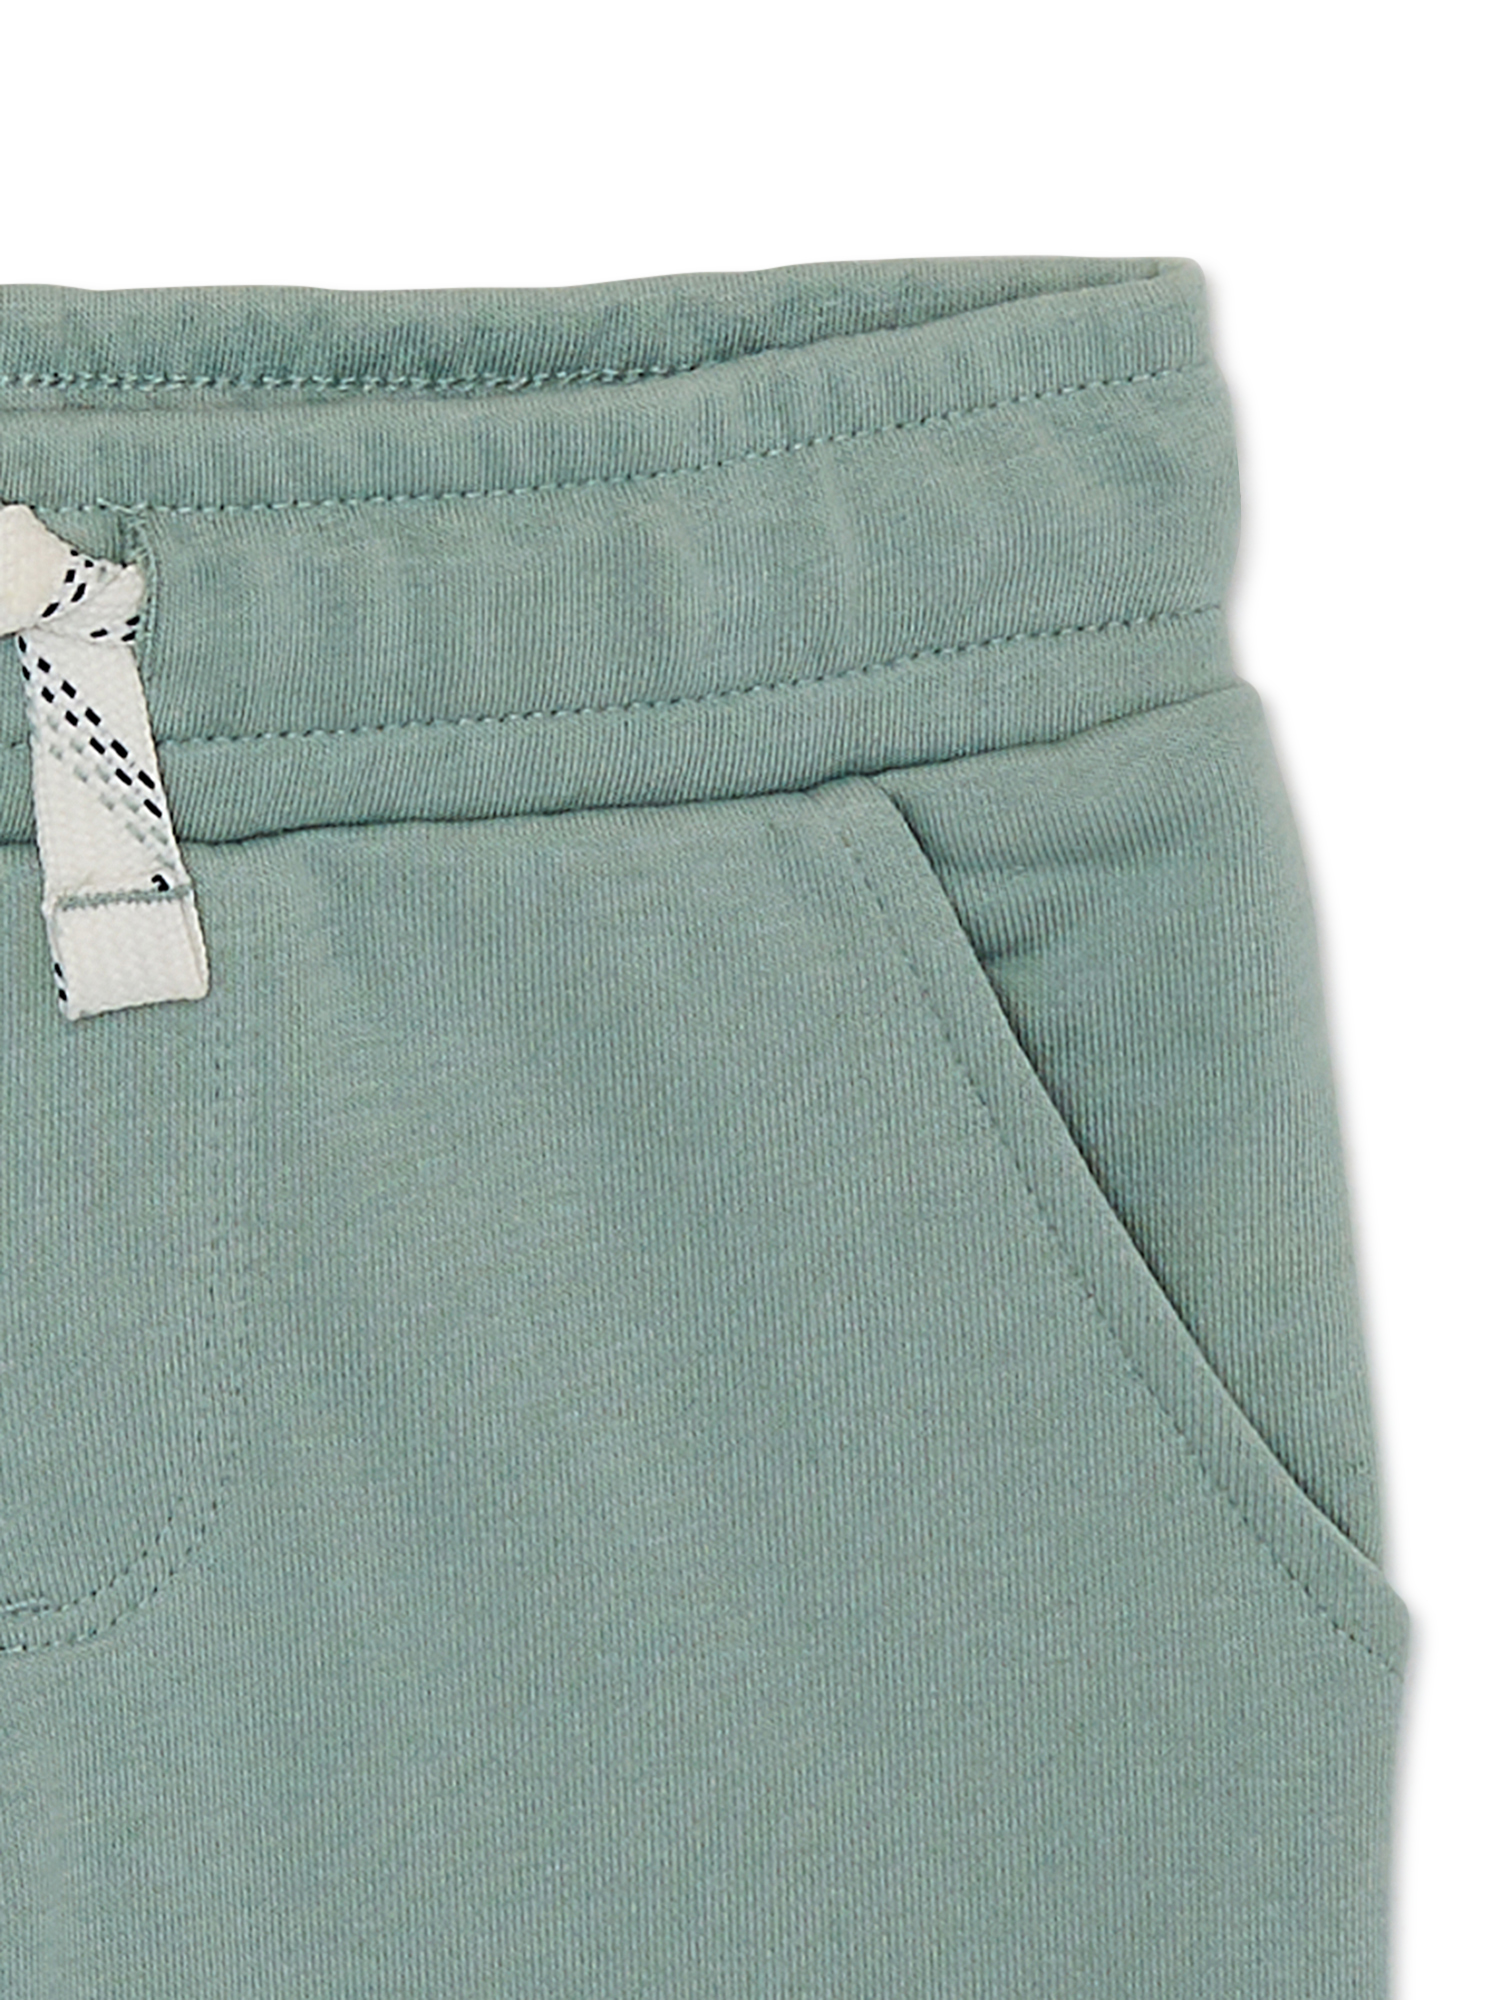 365 Kids Boys French Terry Shorts, Sizes 4-10 - image 2 of 4